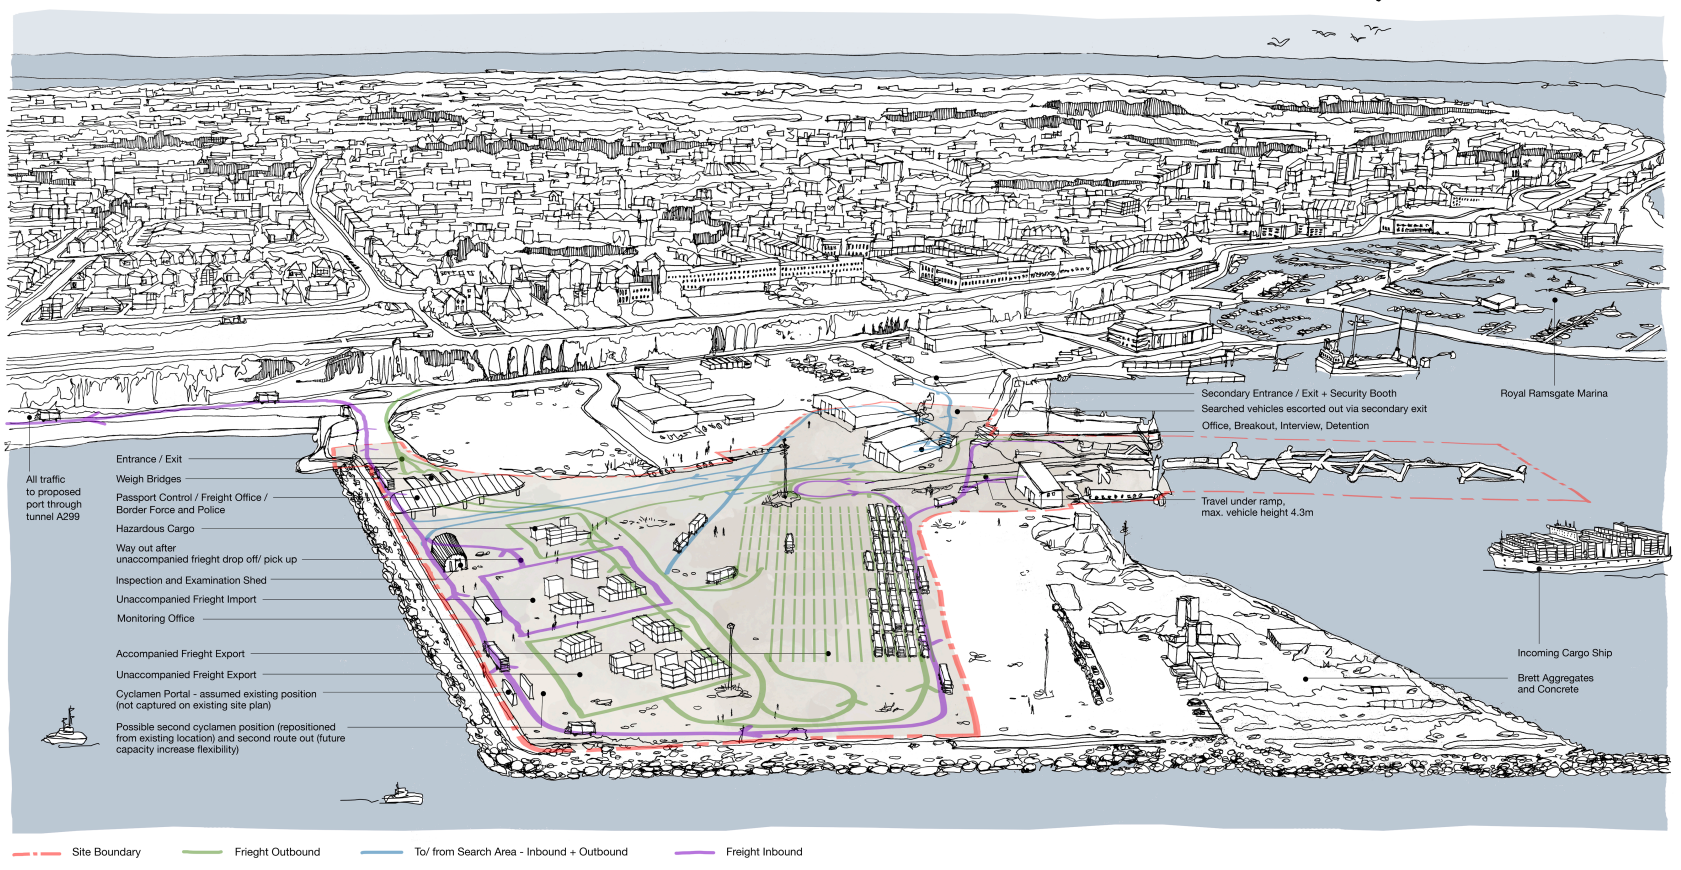 An image showing the proposed traffic plan for the Port of Ramsgate redevelopment.